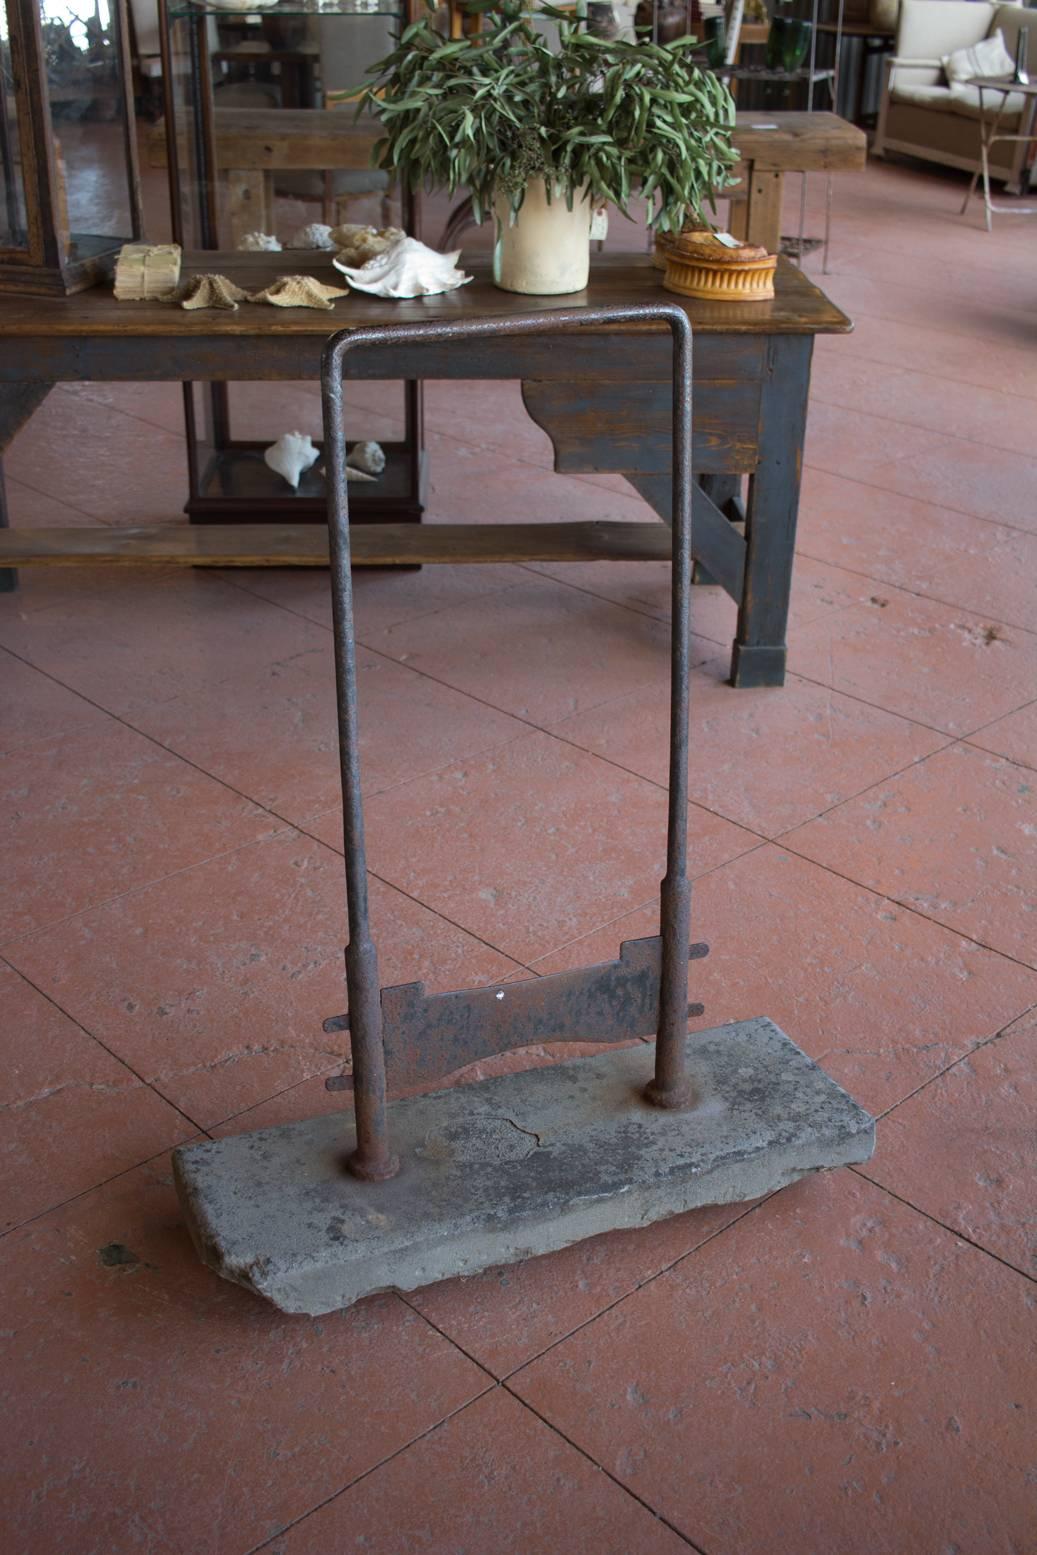 Rare country manor upright iron bootscraper set in it's original flagstone block. Wonderful patina on both the old iron and stone.